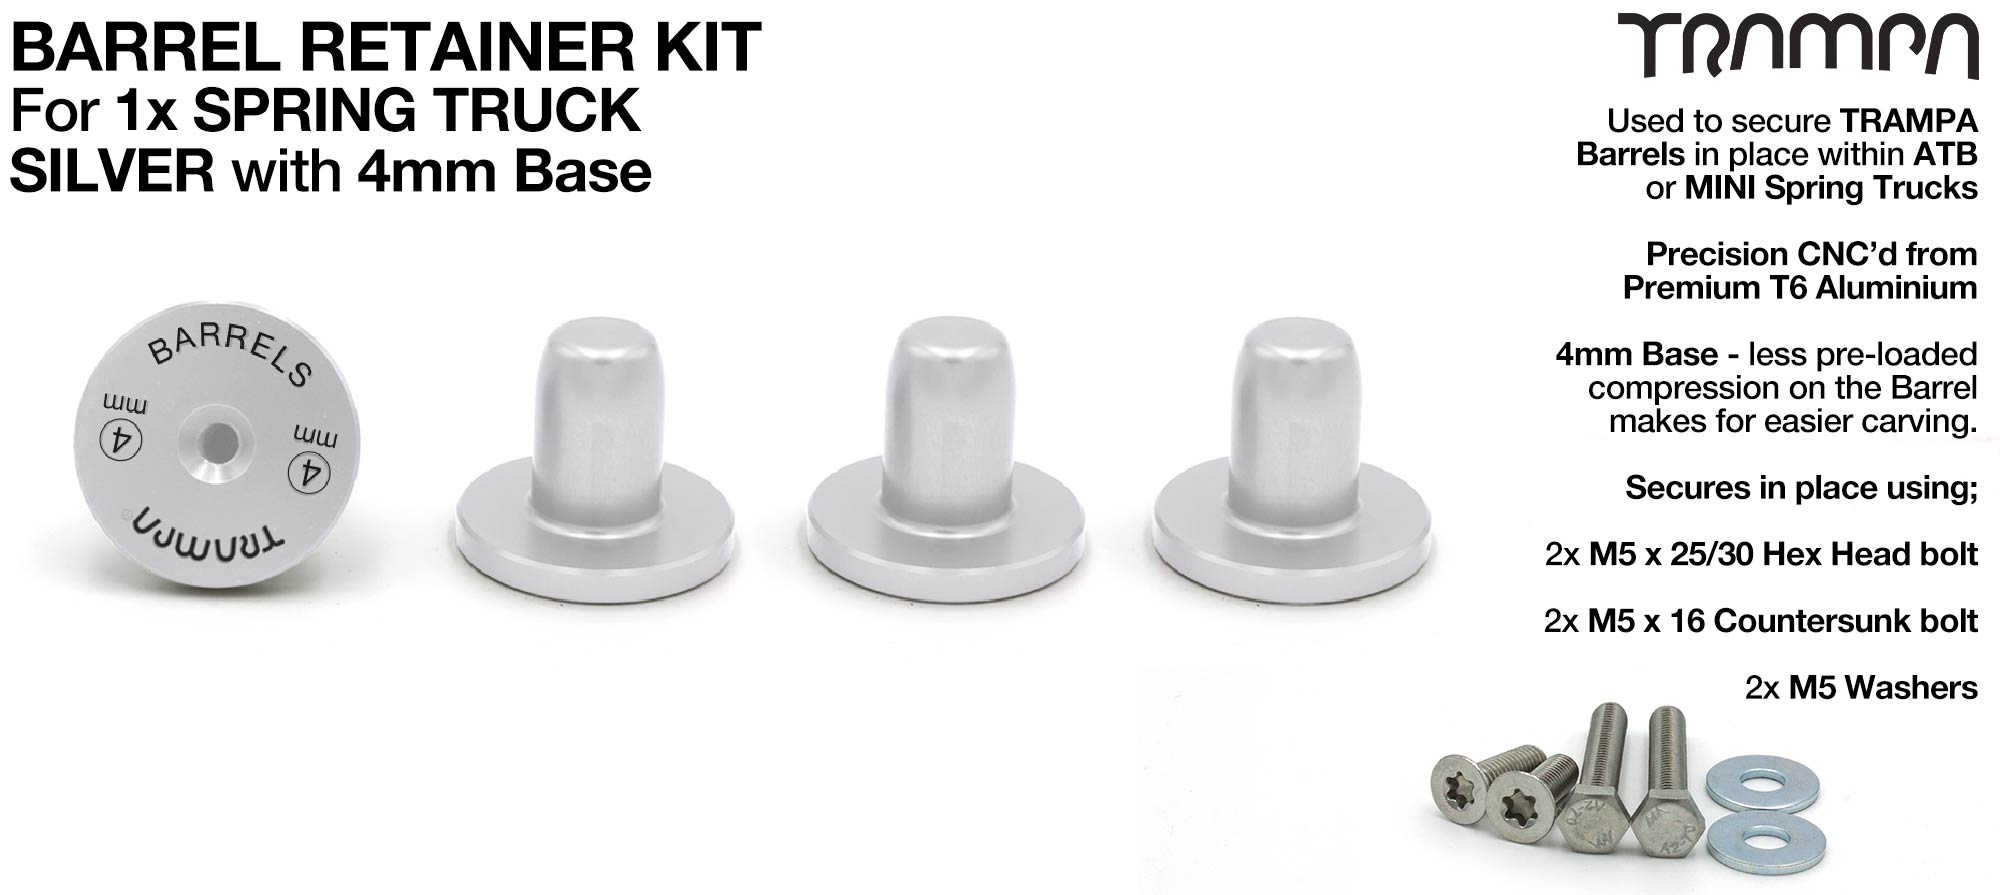 SILVER Barrel Retainers x4 with 4mm Base